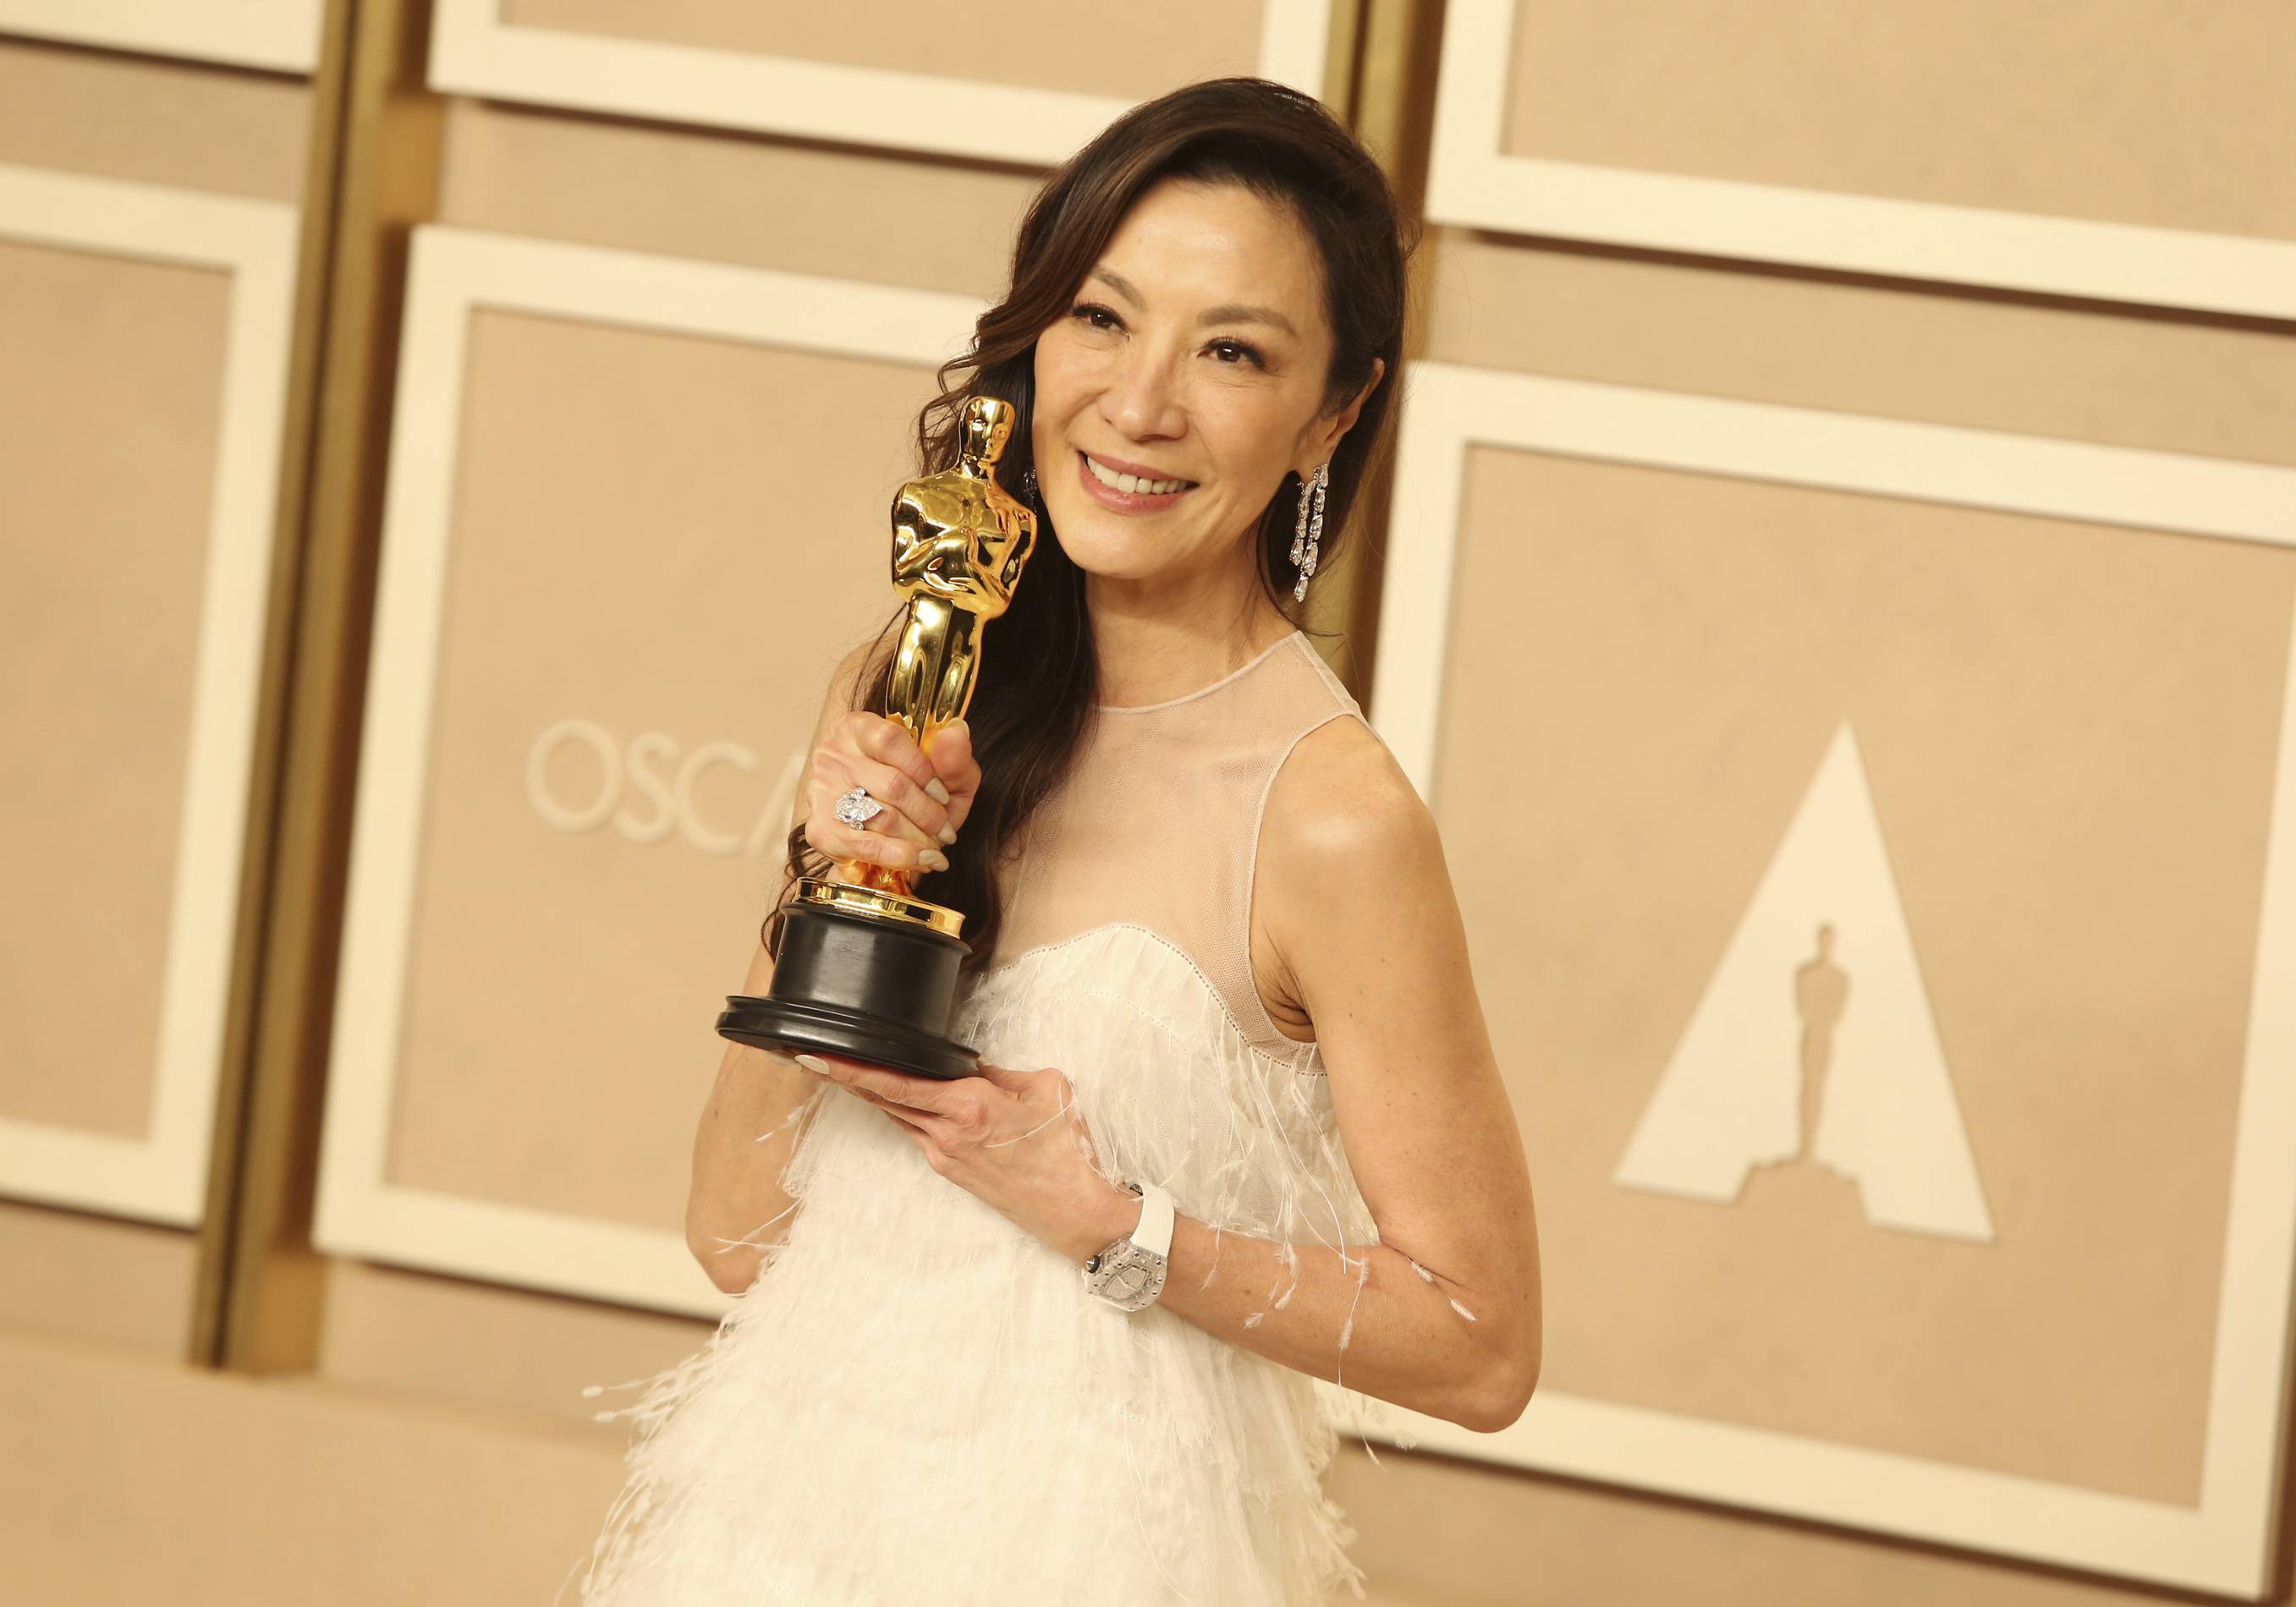 Michelle Yeoh sporing her custom Richard Mille watch at the 2023 Oscars